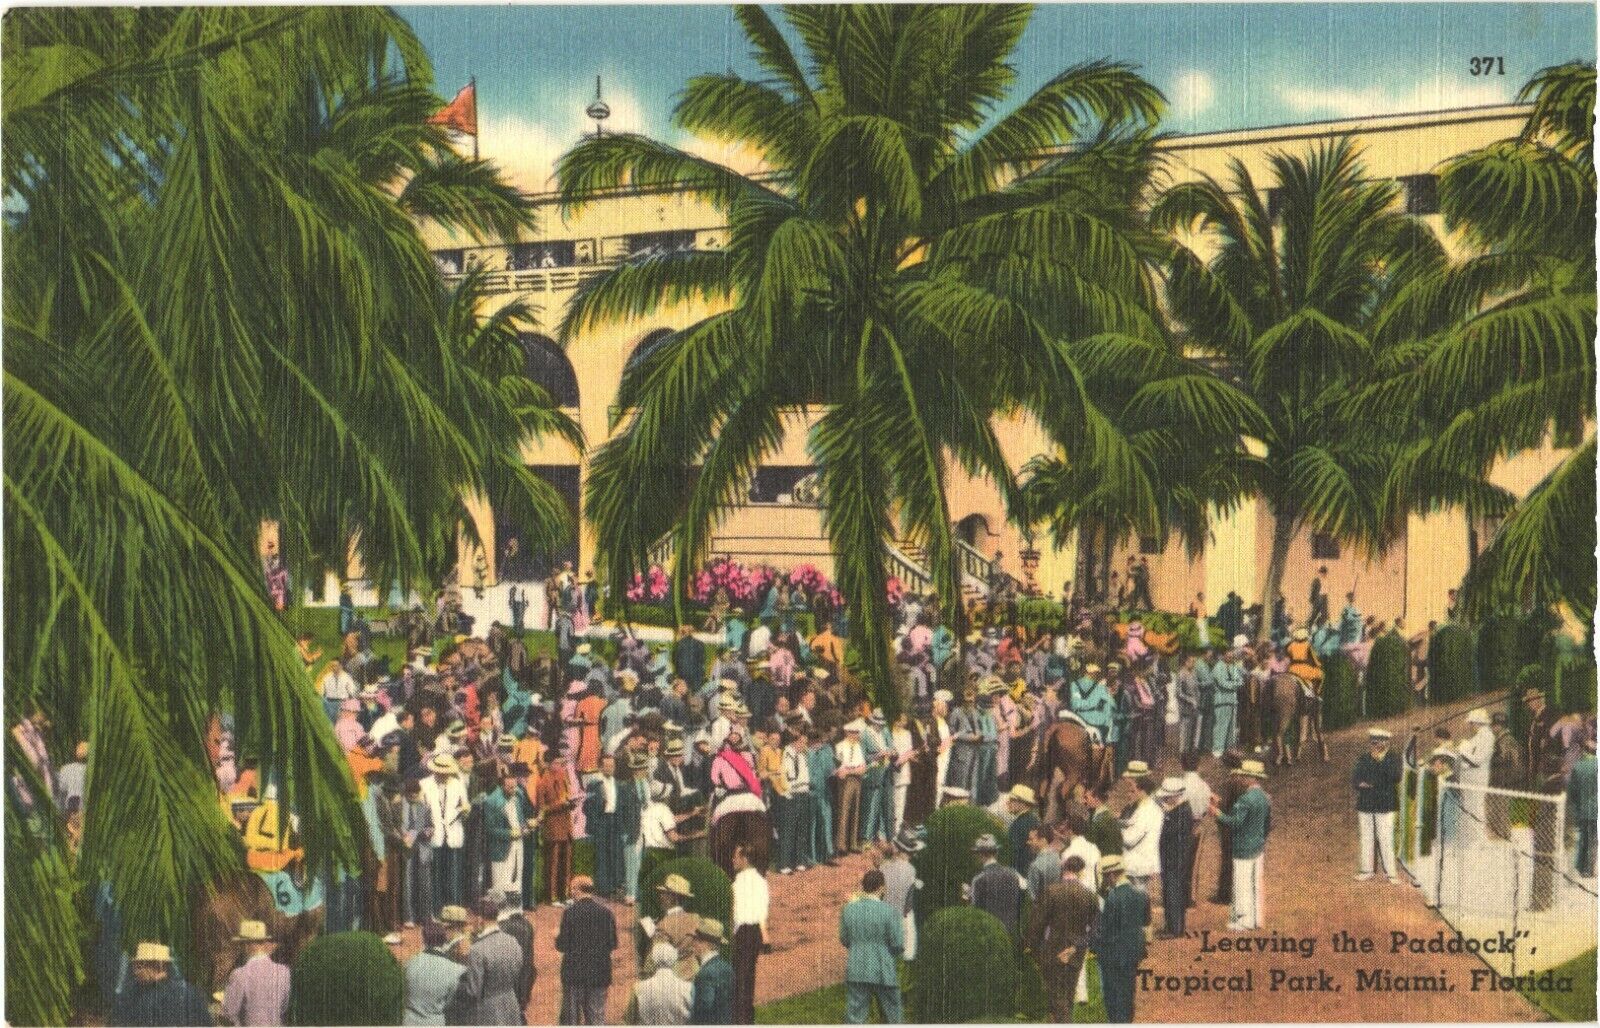 View of Huge Crowd, Leaving The Paddock, Tropical Park, Miami, Florida Postcard